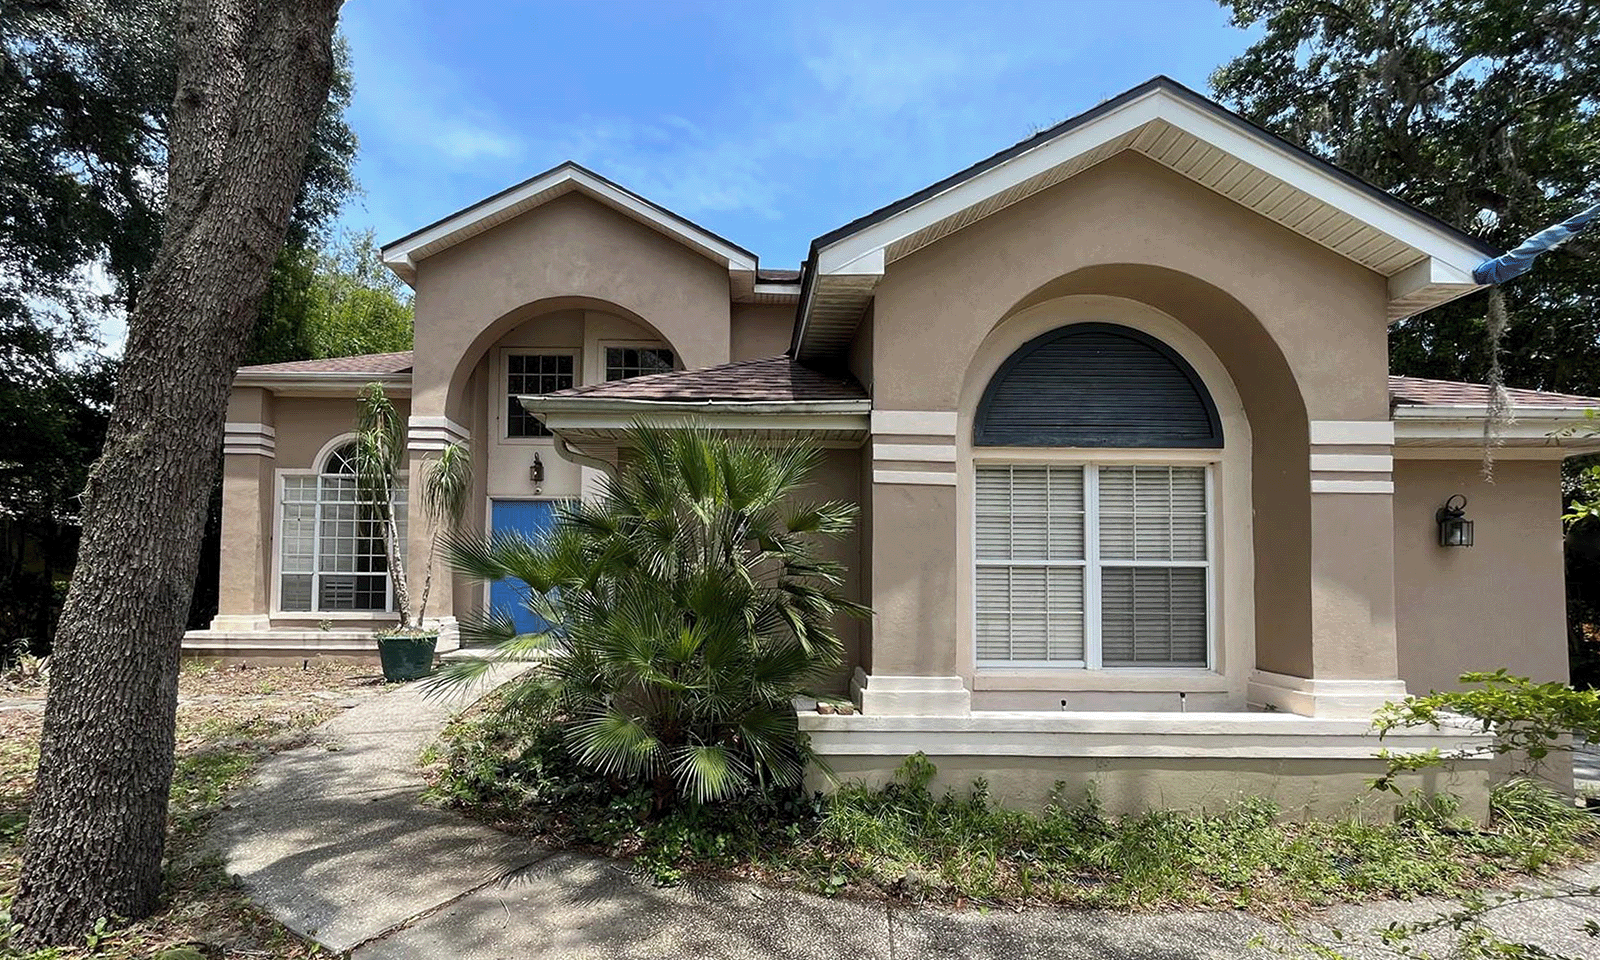 front of home with beige and white paint